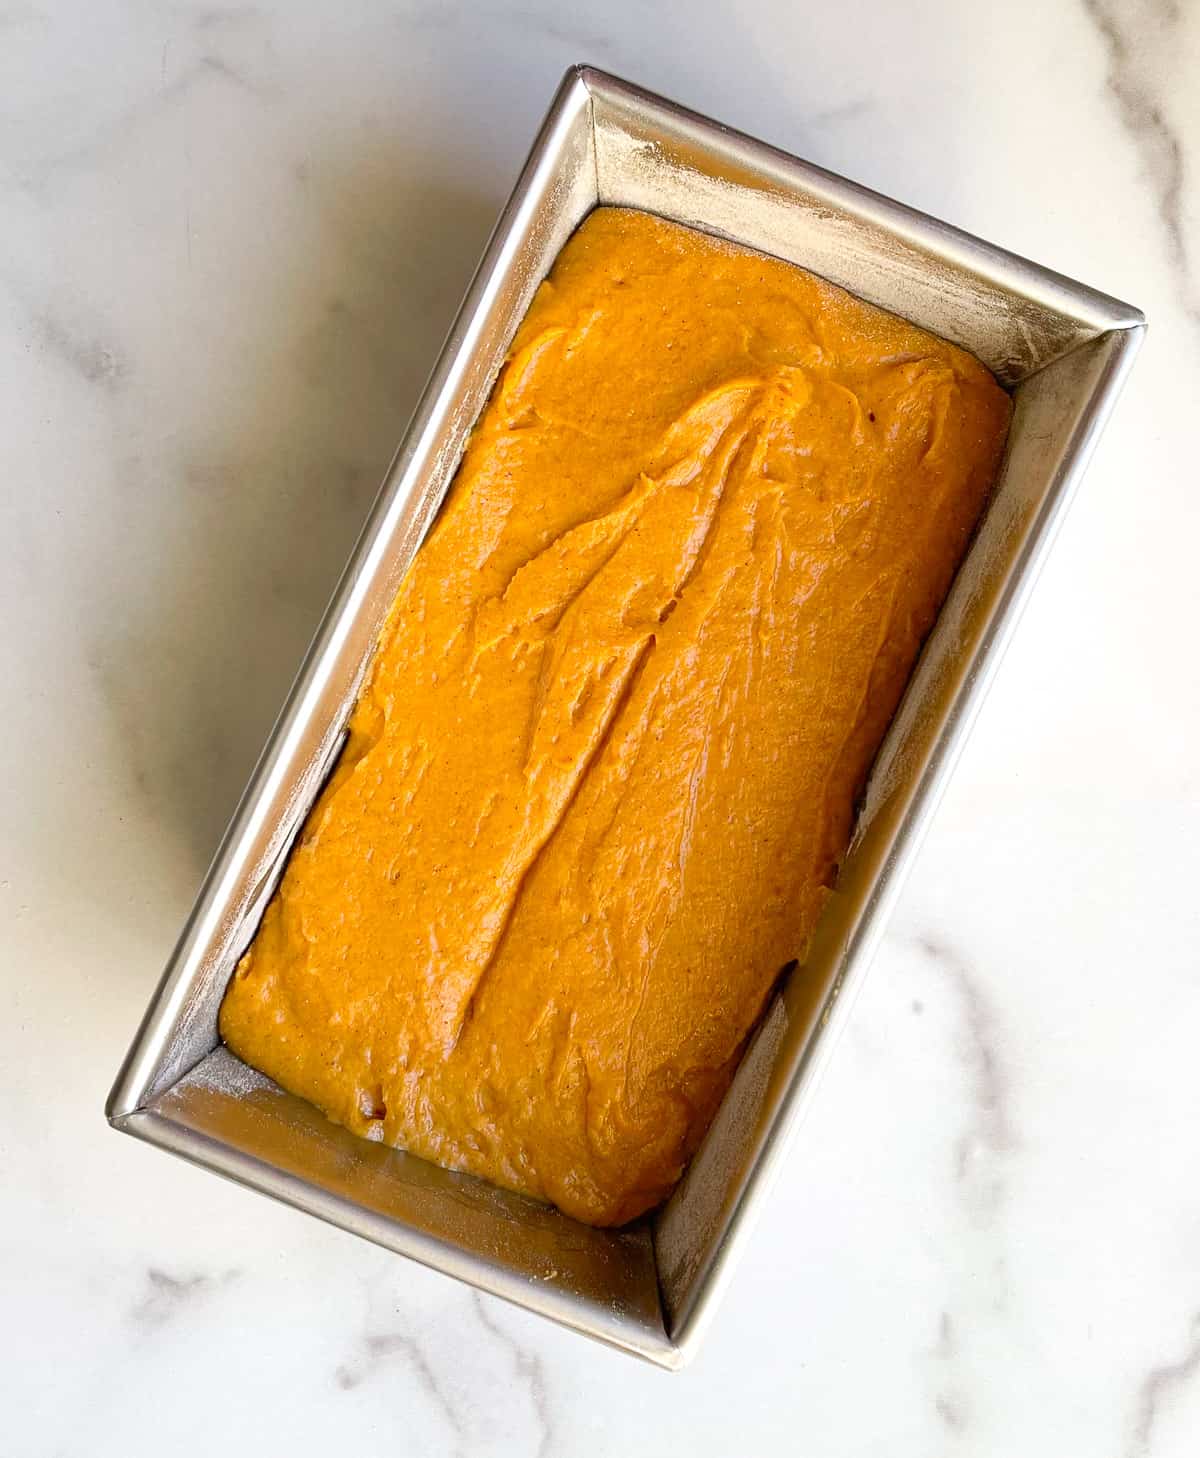 Adding batter to the loaf pan